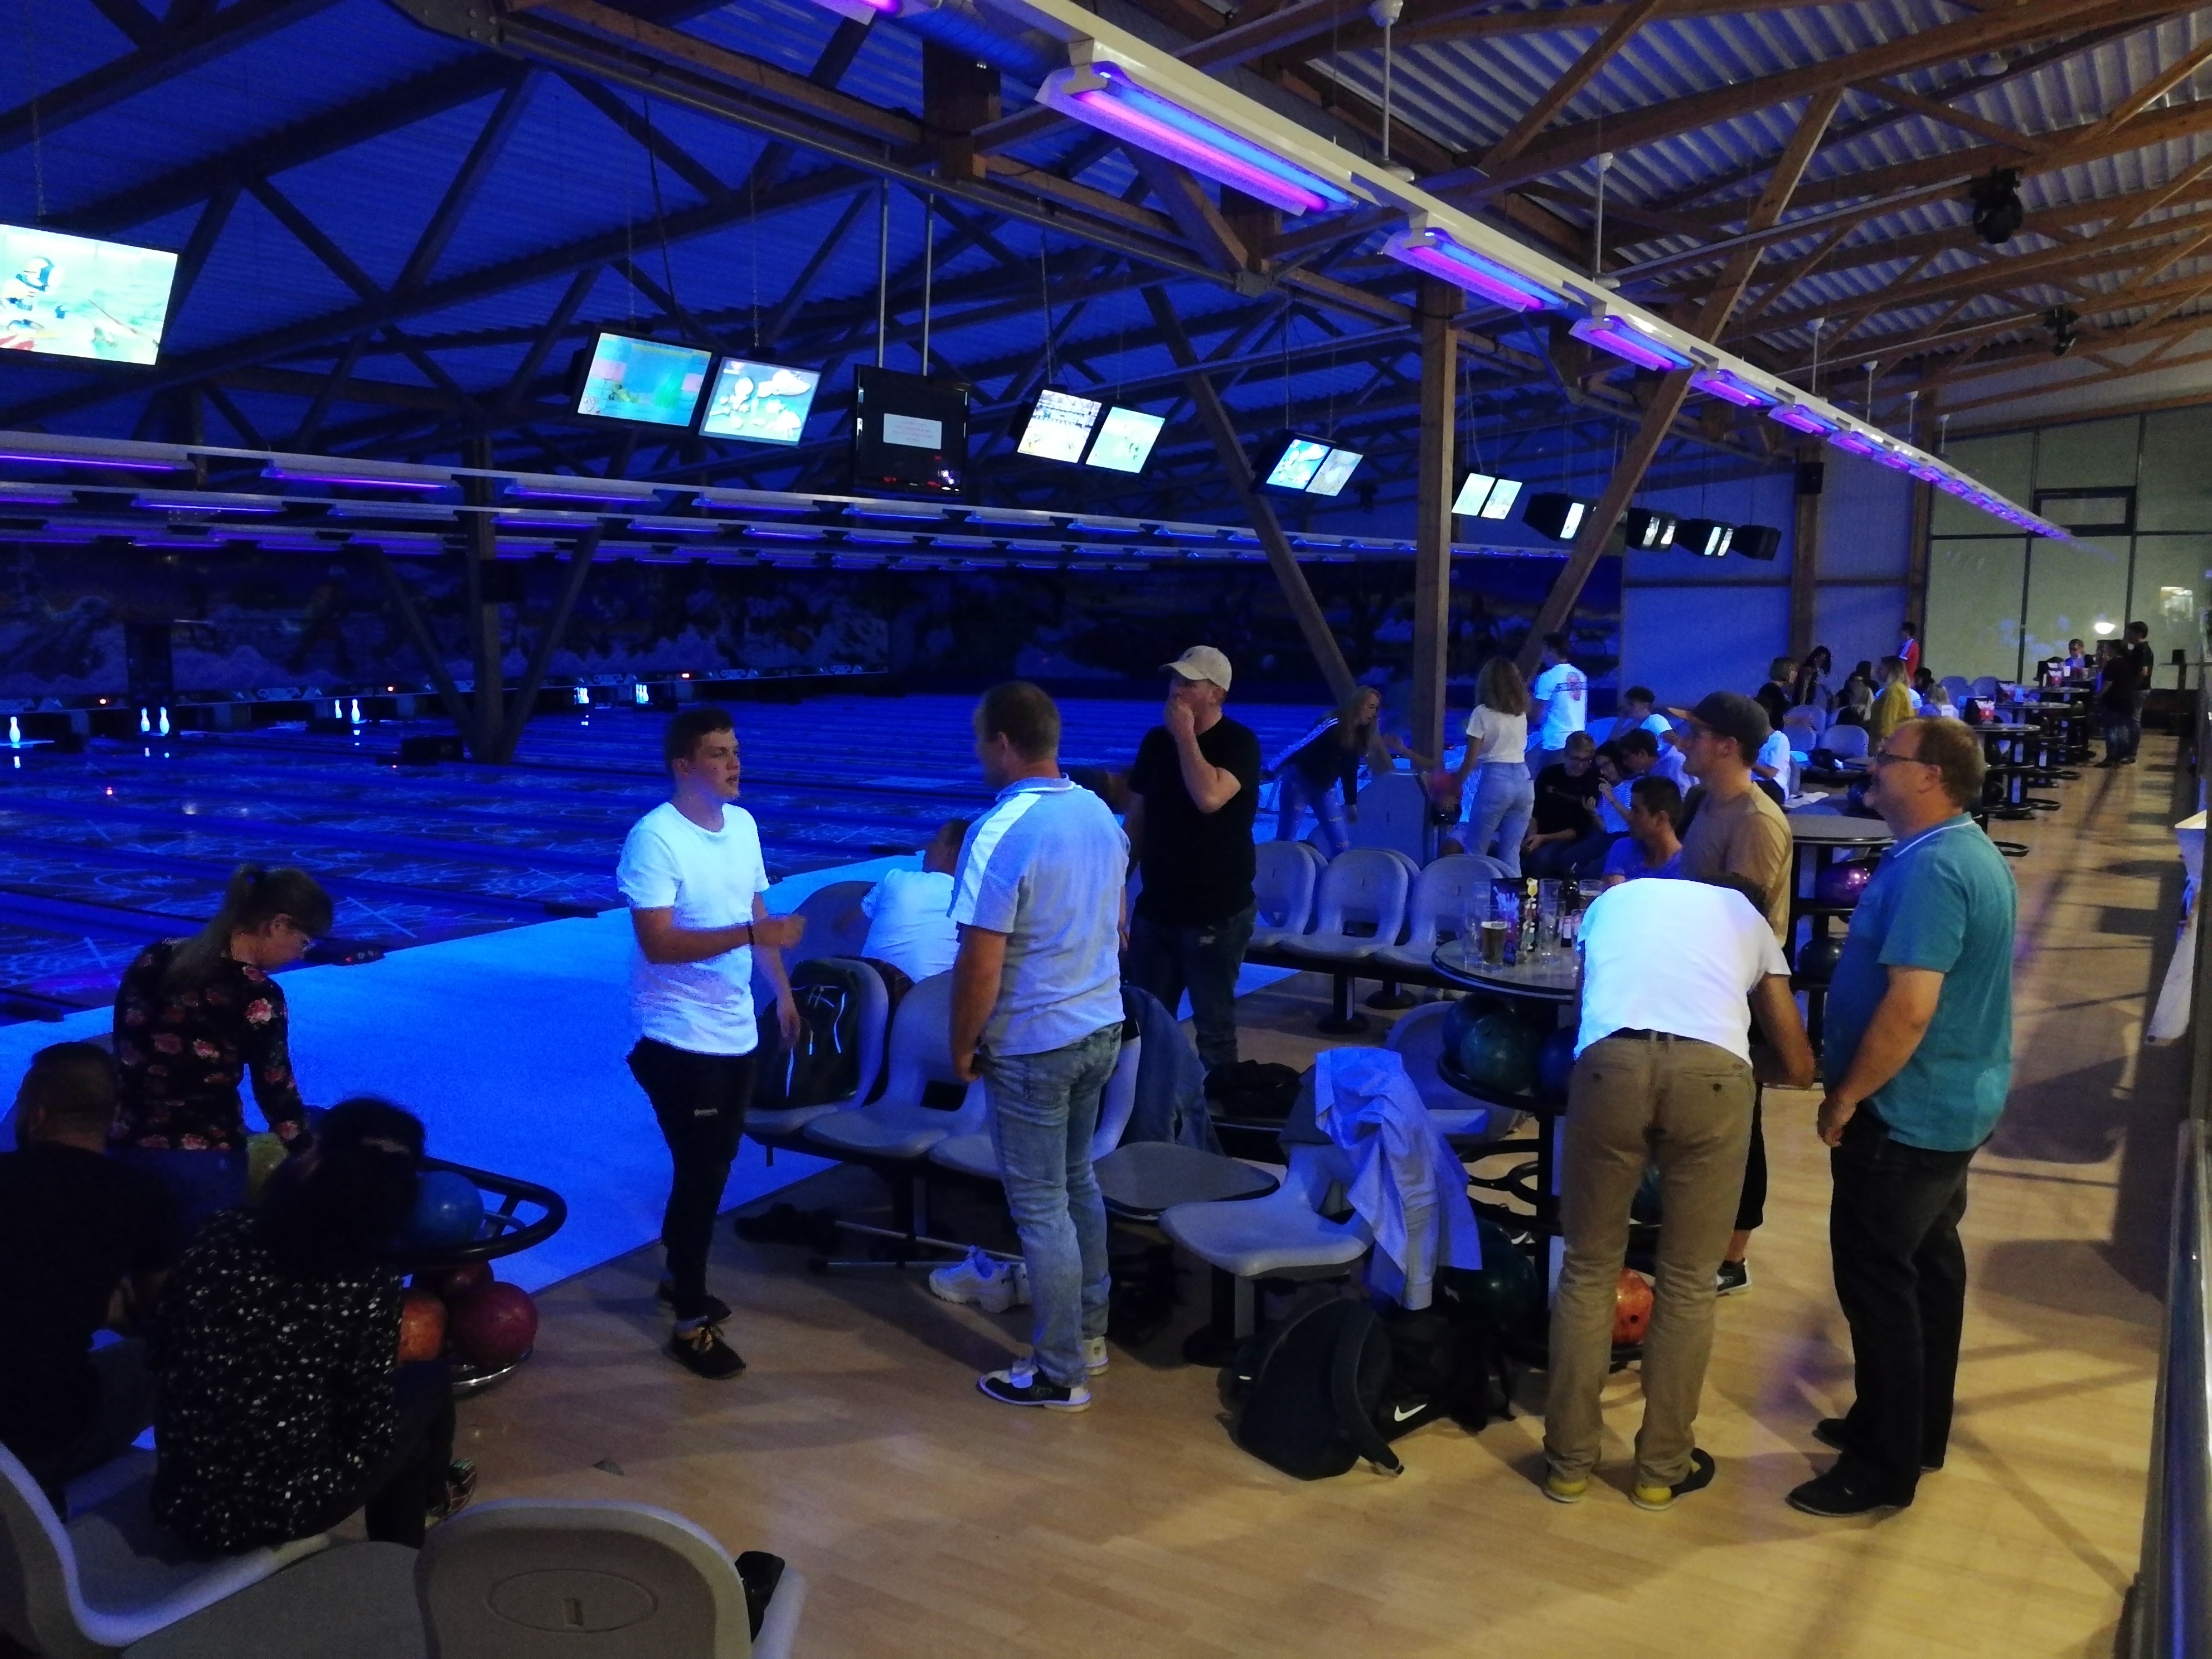 Bowling in Delémont